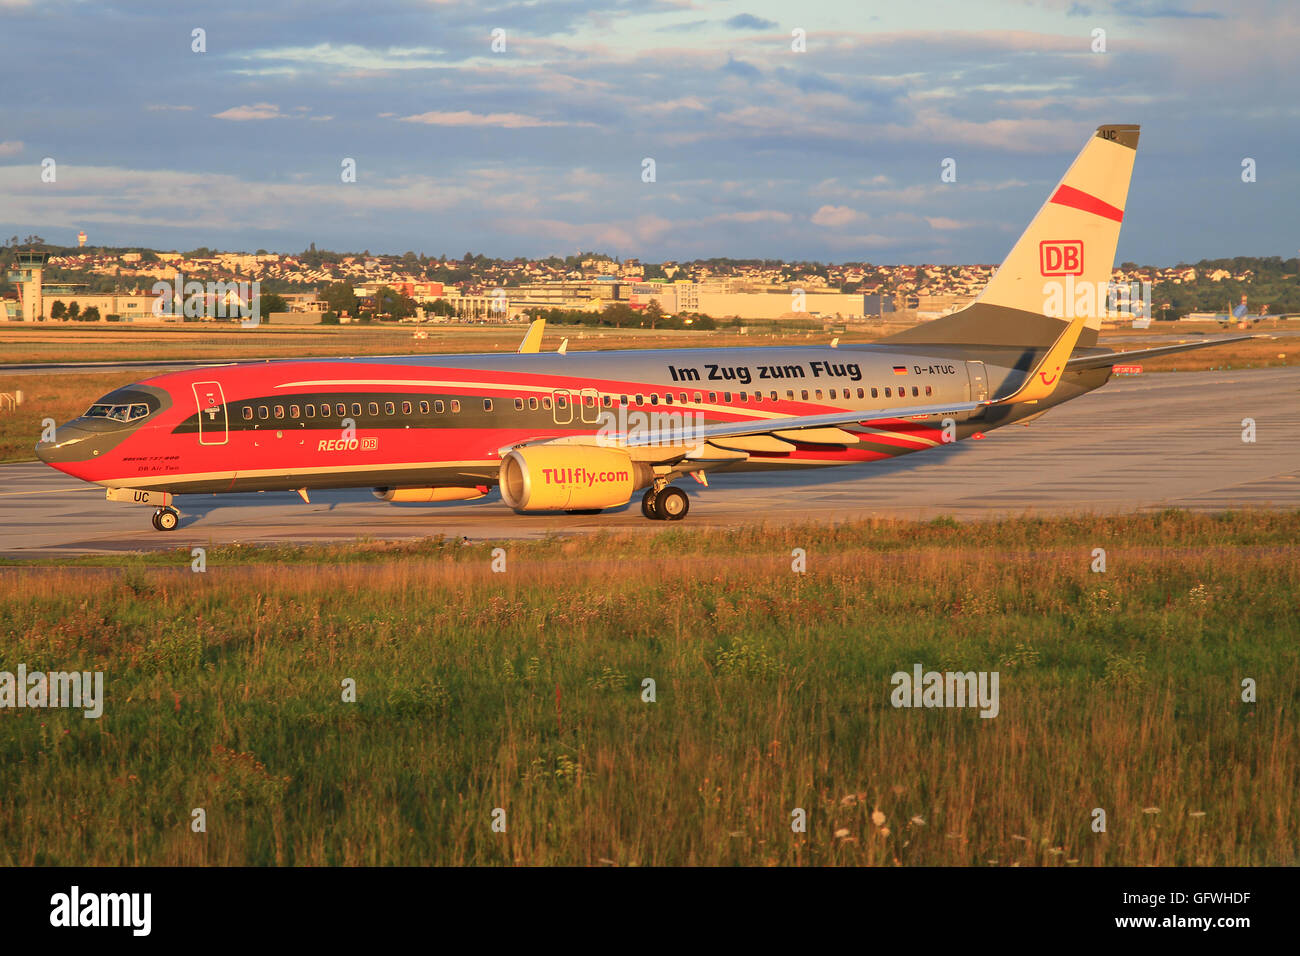 Stuttagart/Germany July 12, 2012: Boeing 737 from Tuifly with DB livery ready to takeoff at Stuttgart Airport. Stock Photo